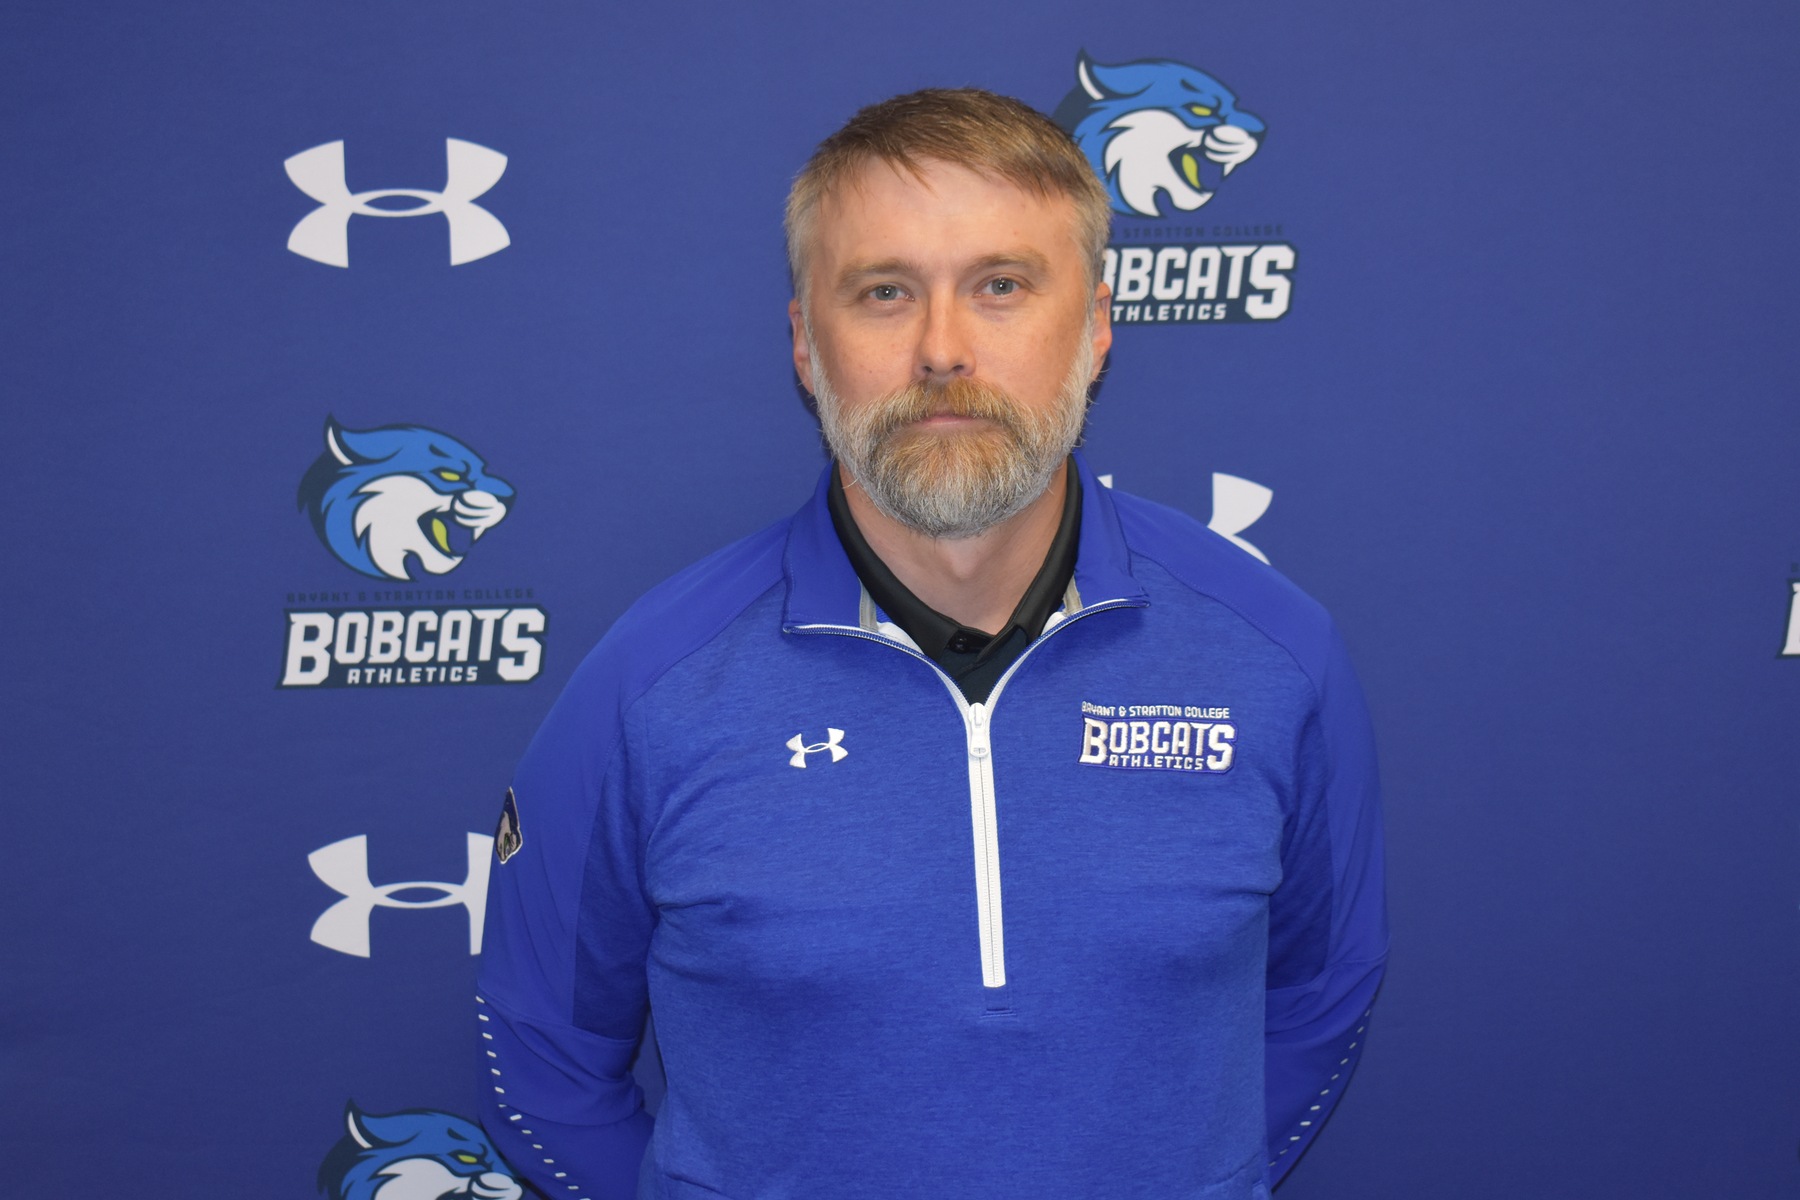 BUDDY GENTRY NAMED HEAD MEN'S SOCCER COACH AT BRYANT & STRATTON COLLEGE